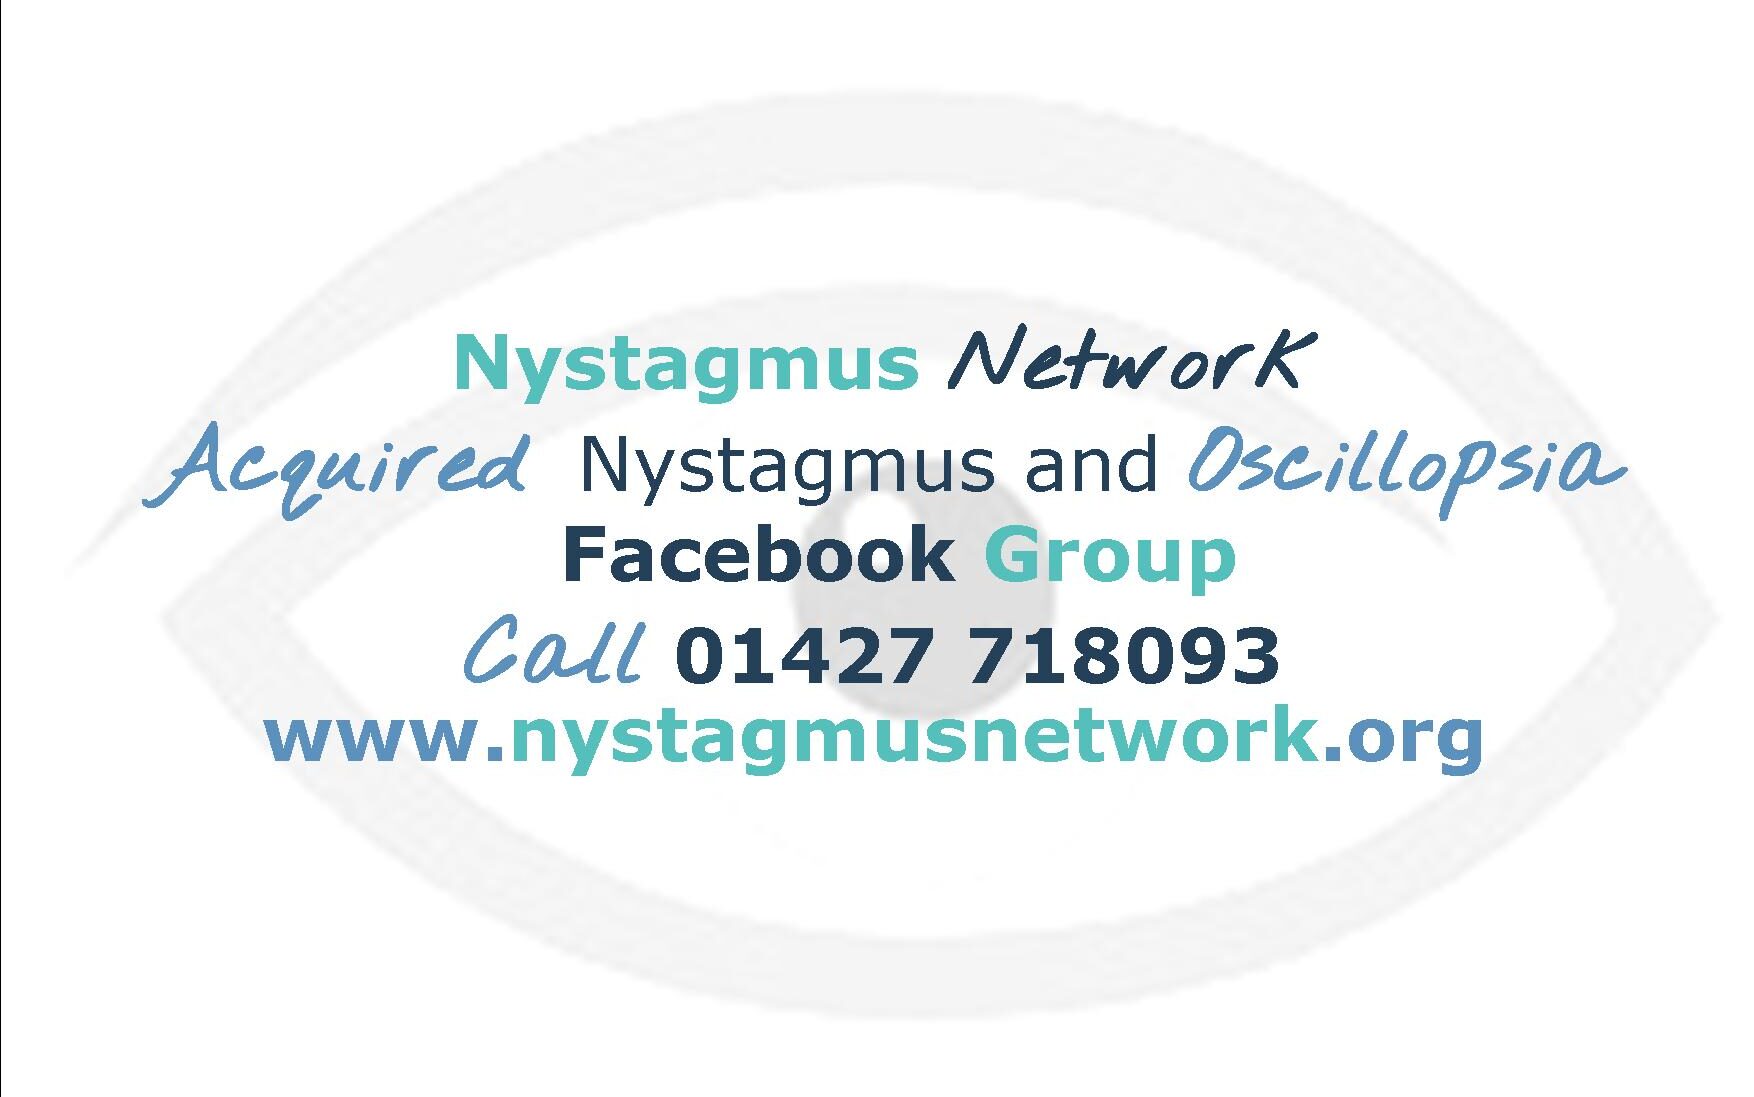 An image shwoing the Nystagmus Network eye logo and the words Nystagmus Network Acquired Nystagmus and Oscillopsia Facebook Group, call 01427 718093, www.nystagmusnet.org